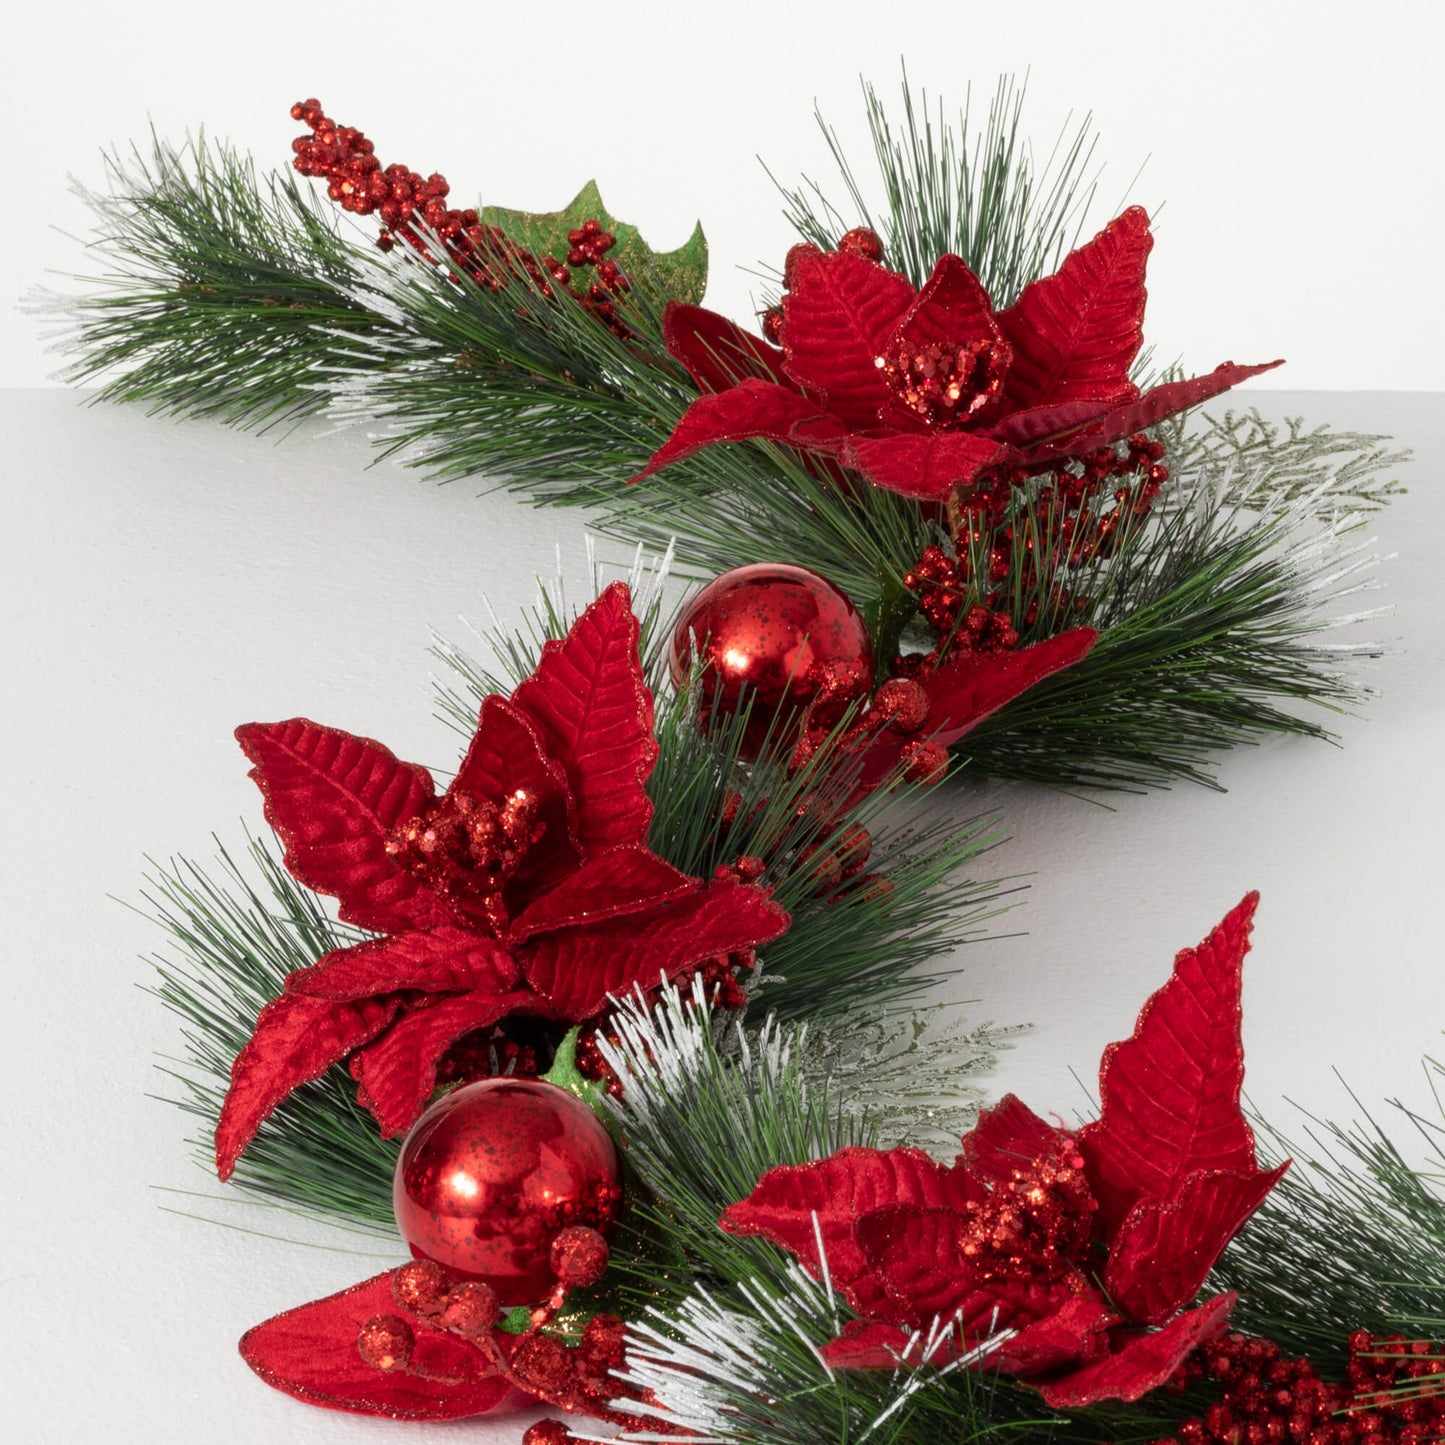 POINSETTIA AND PINE GARLAND